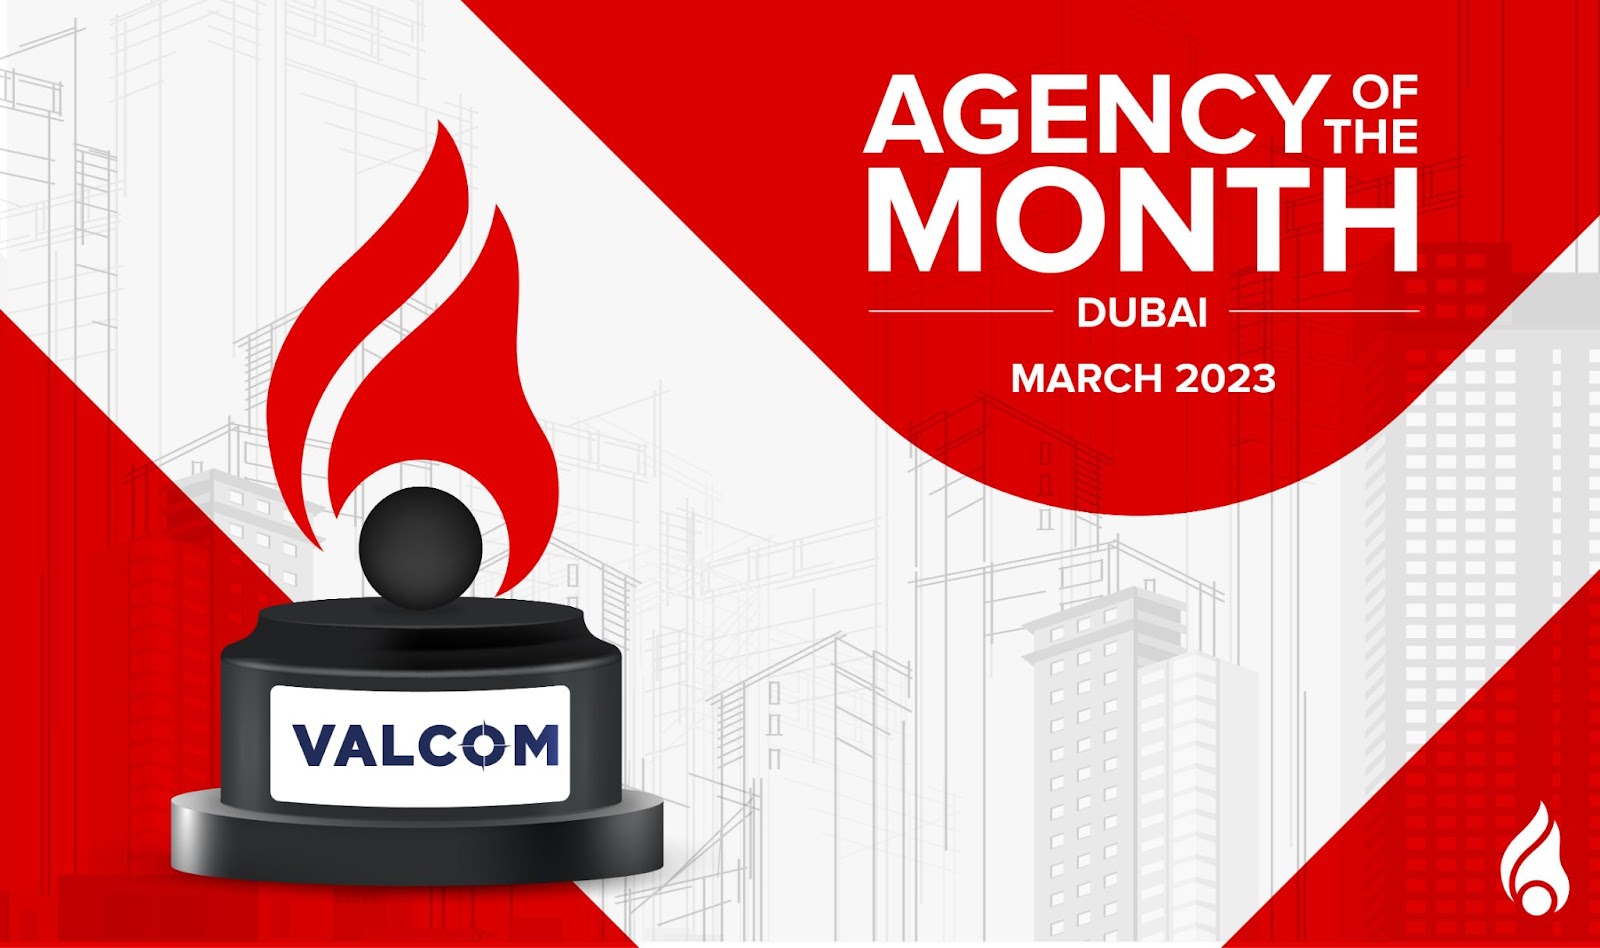 Agency of the Month Dubai March 2023